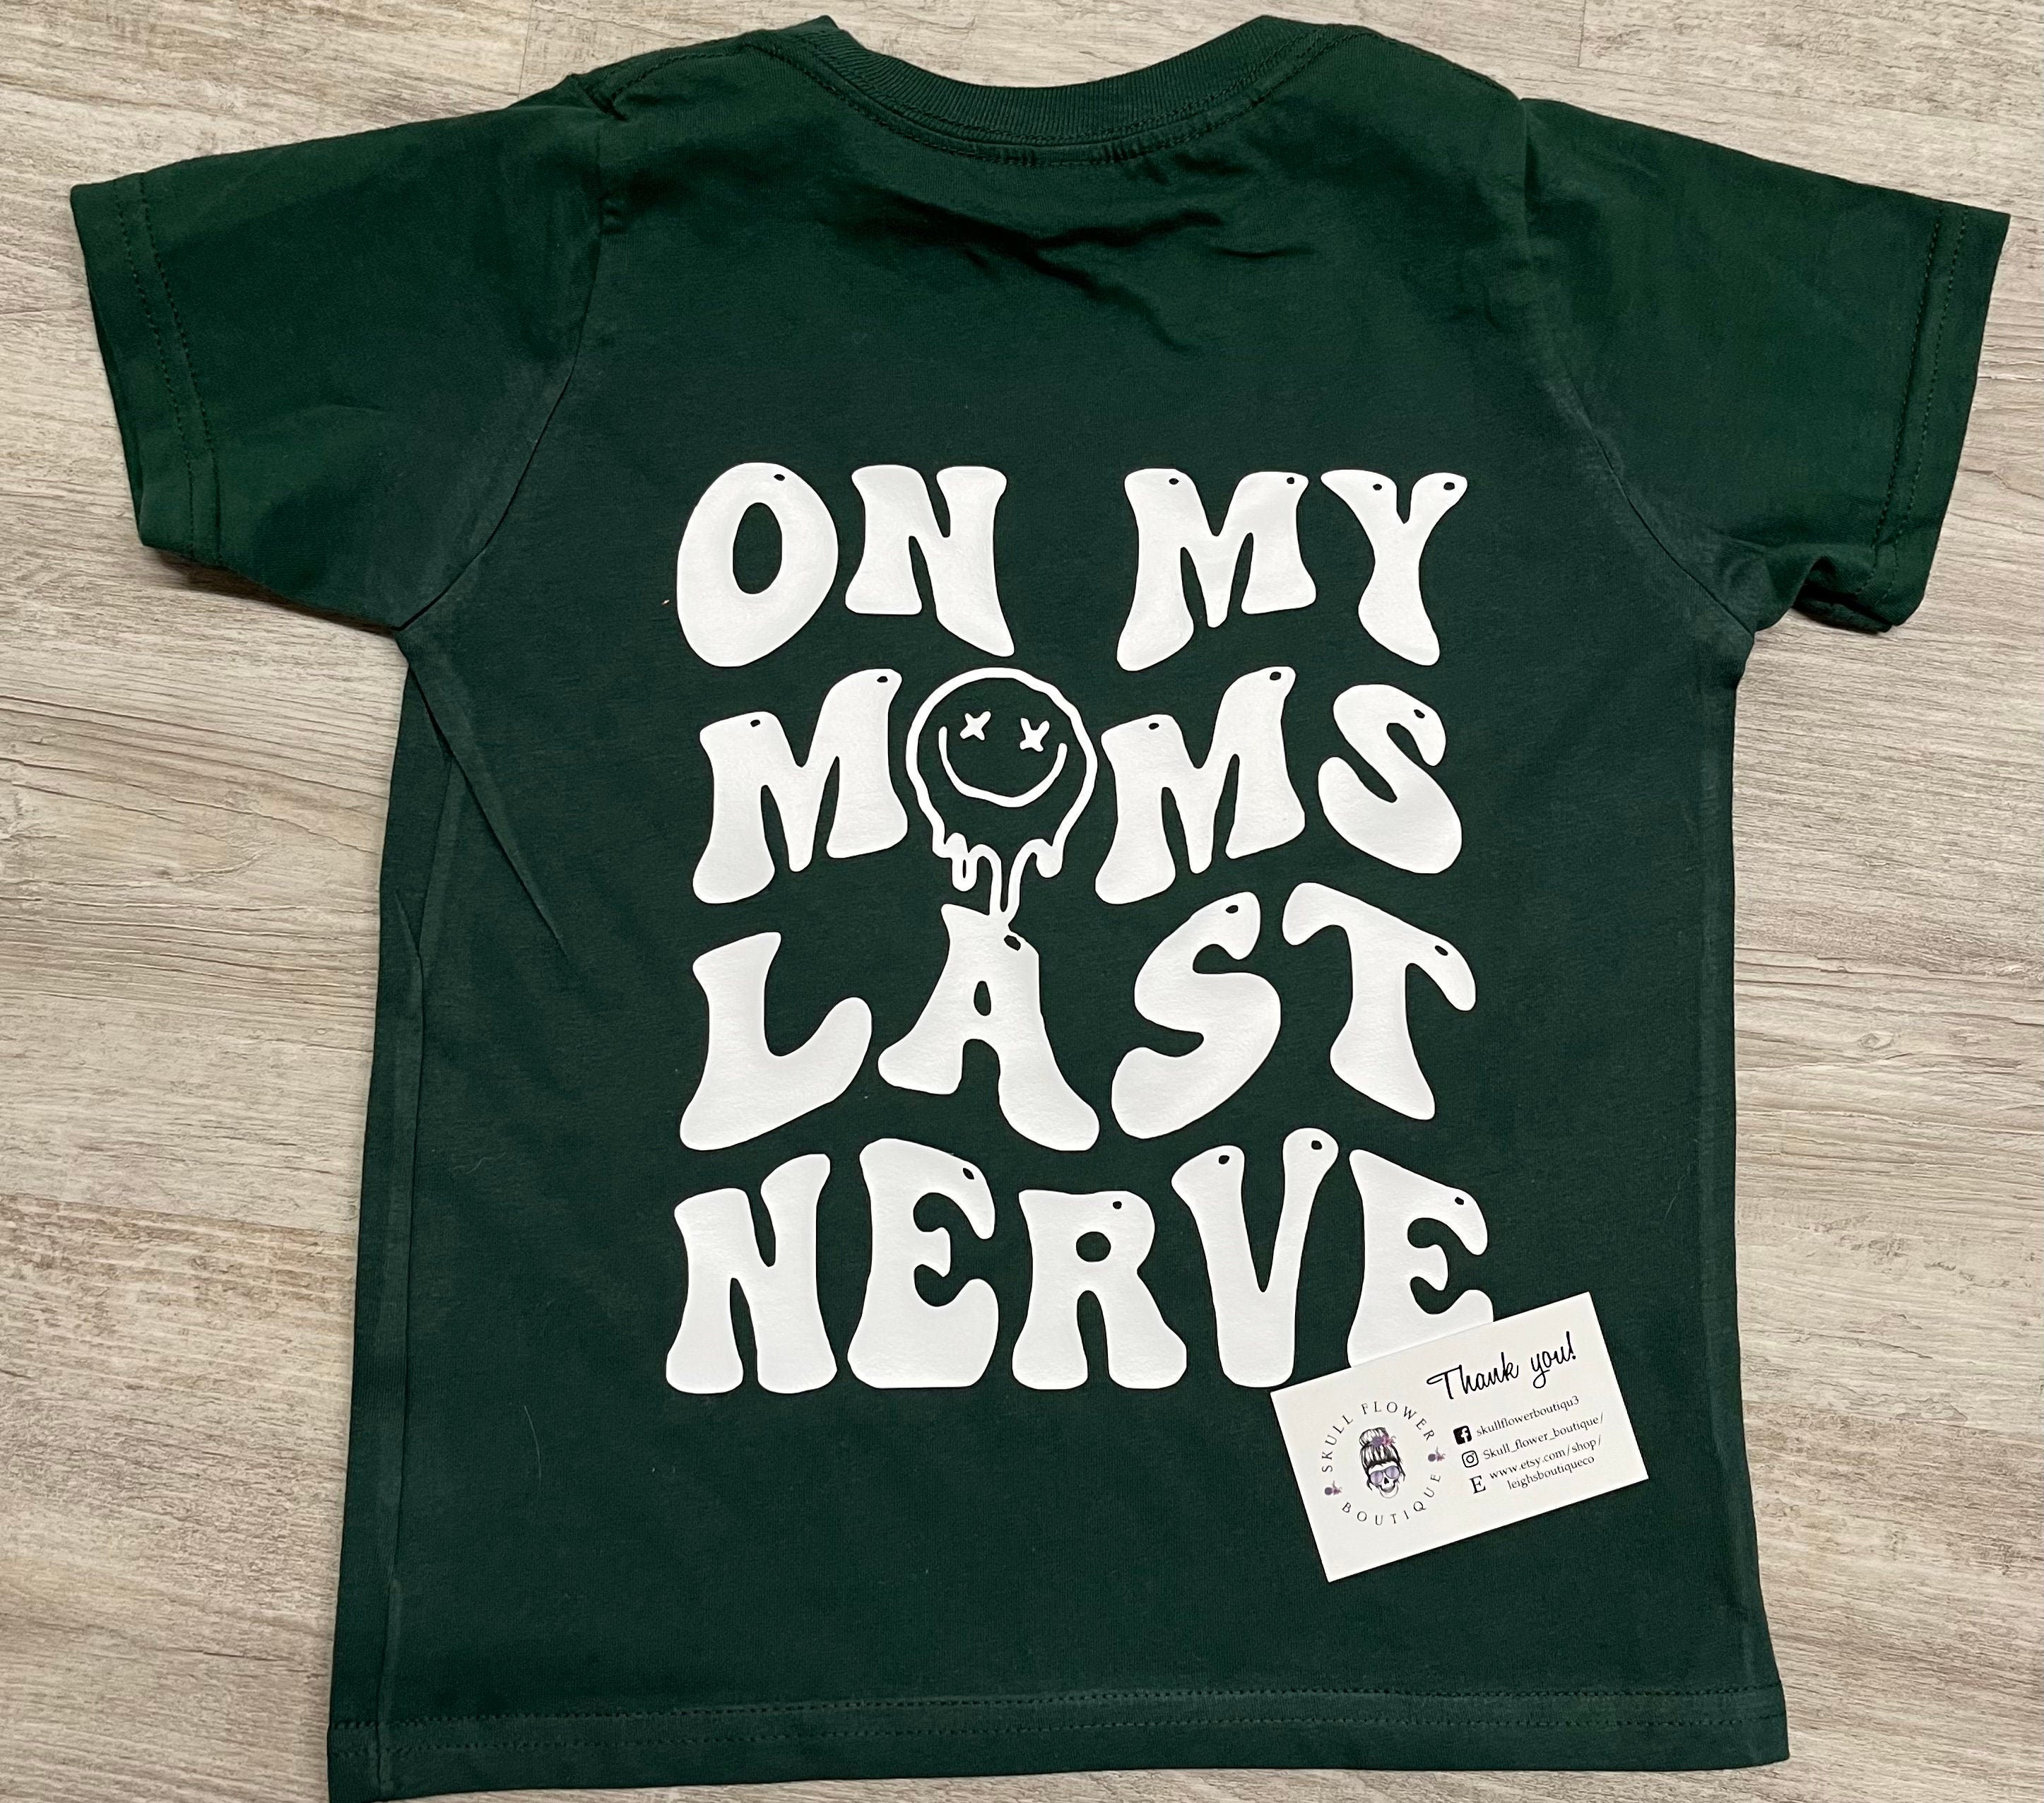 Don't let mom's last nerve get the best of her! –